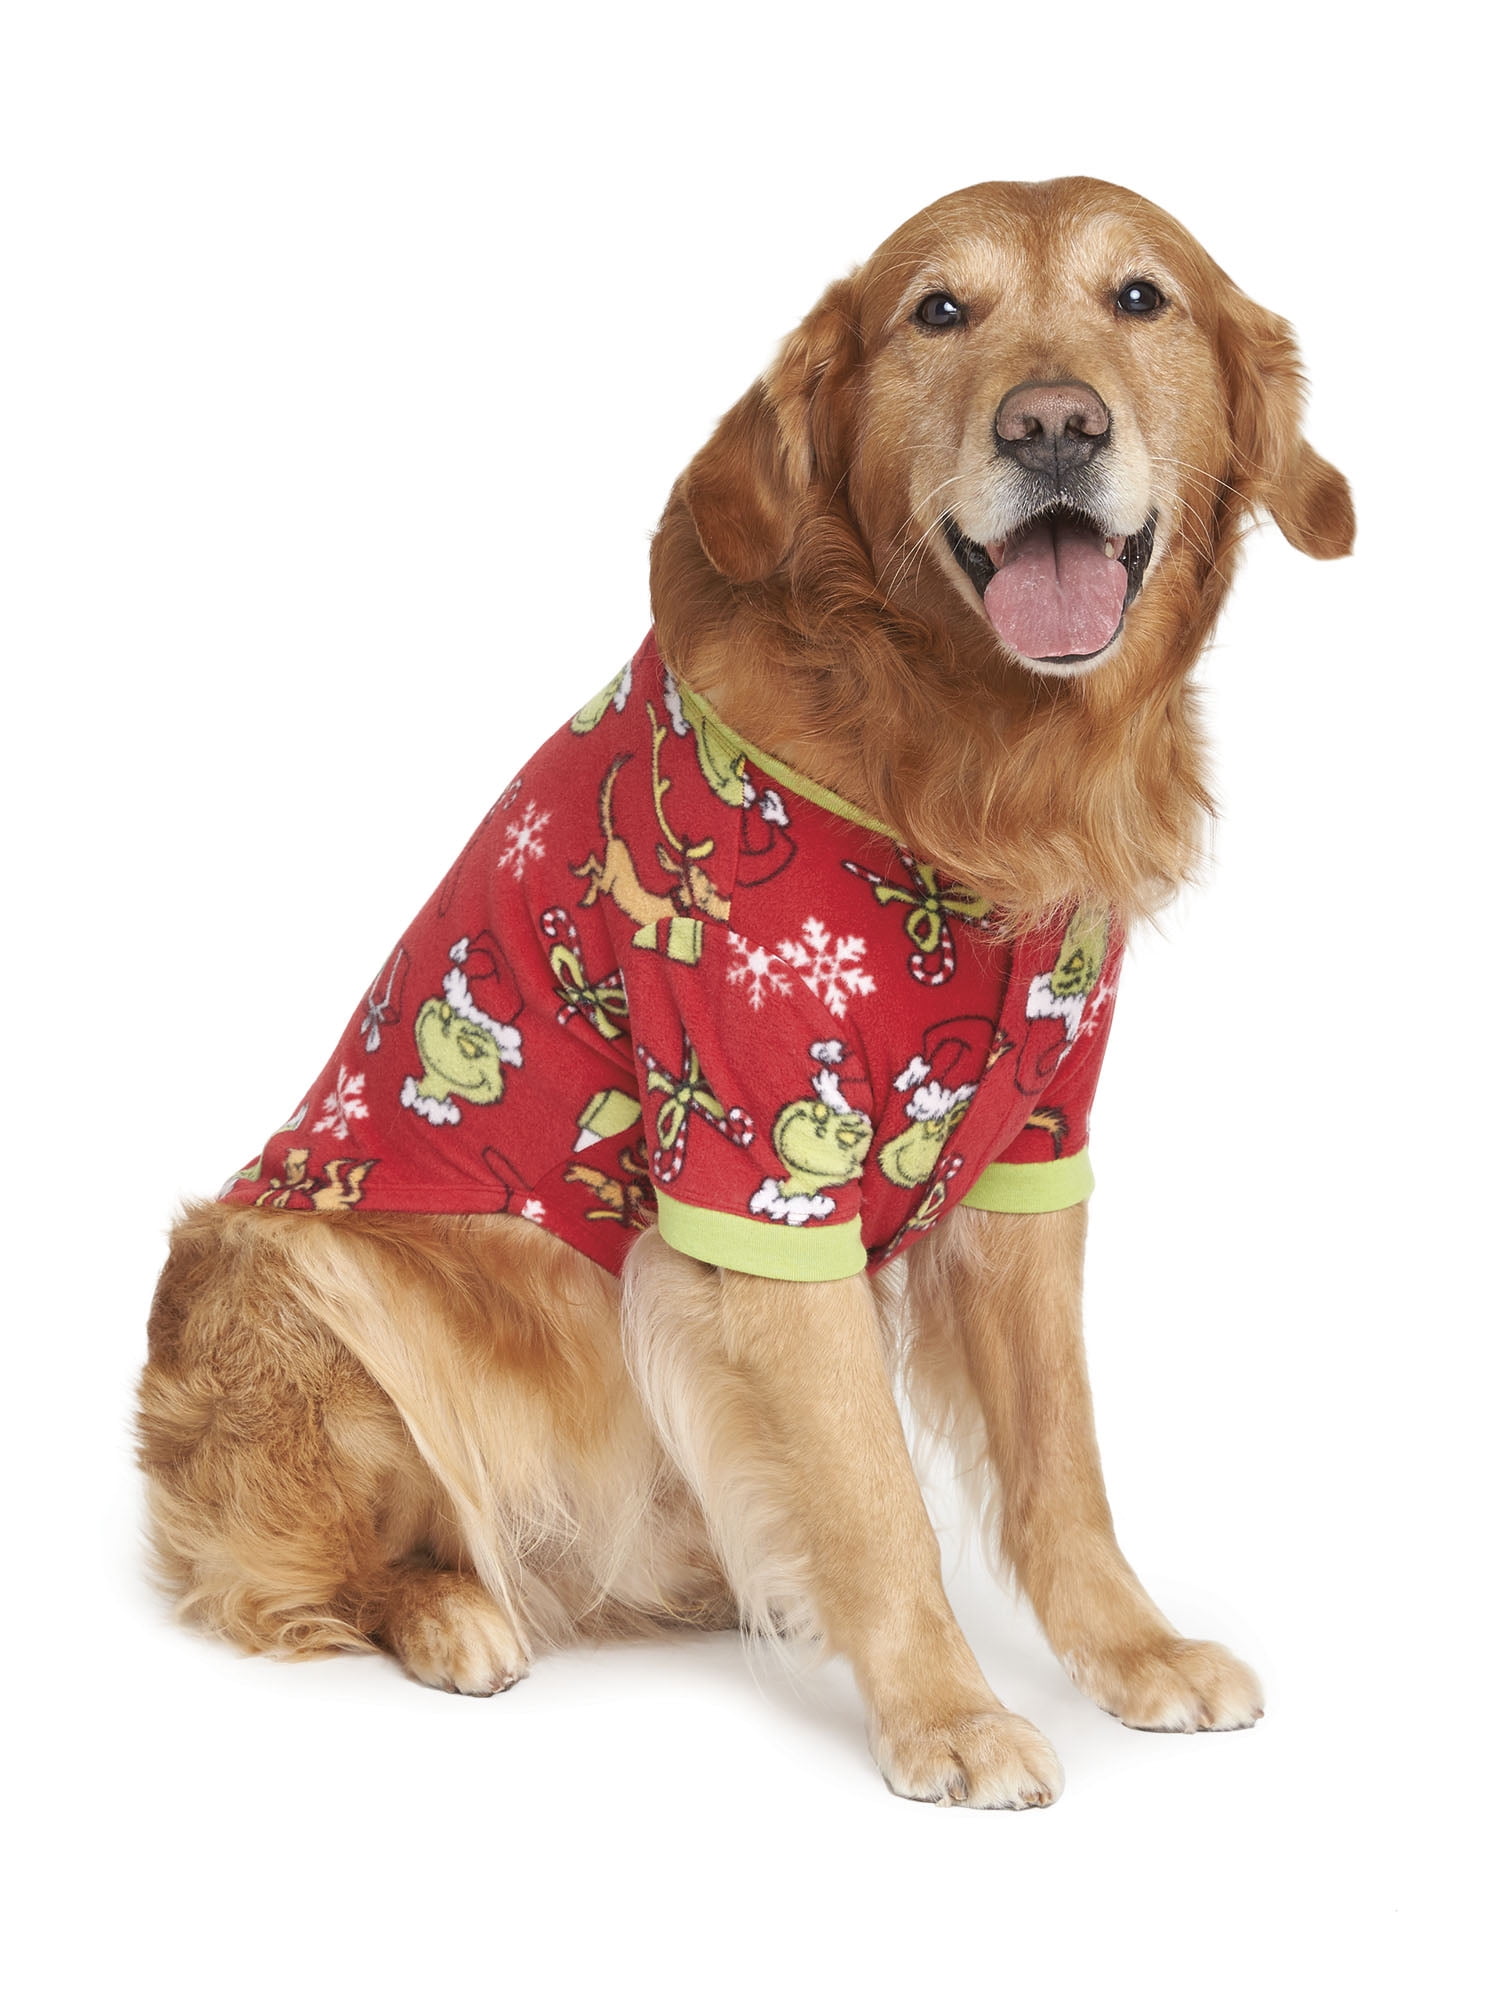 Dr. Seuss' The Grinch - Matching Family Christmas Pajamas Dog and Cat Dr. Seuss The Grinch Pet ...